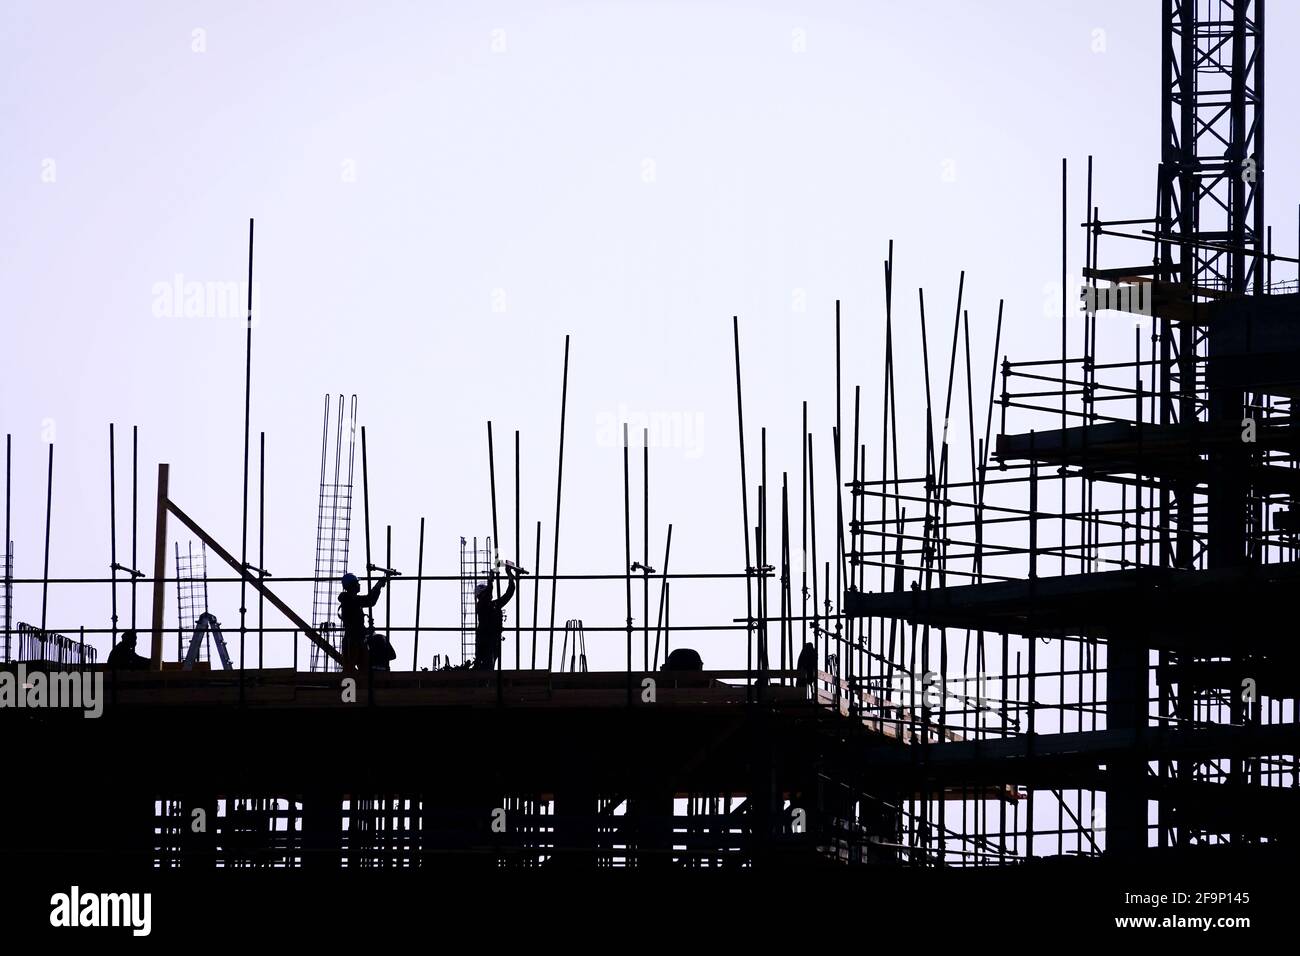 The group of workers working at a construction site. Stock Photo